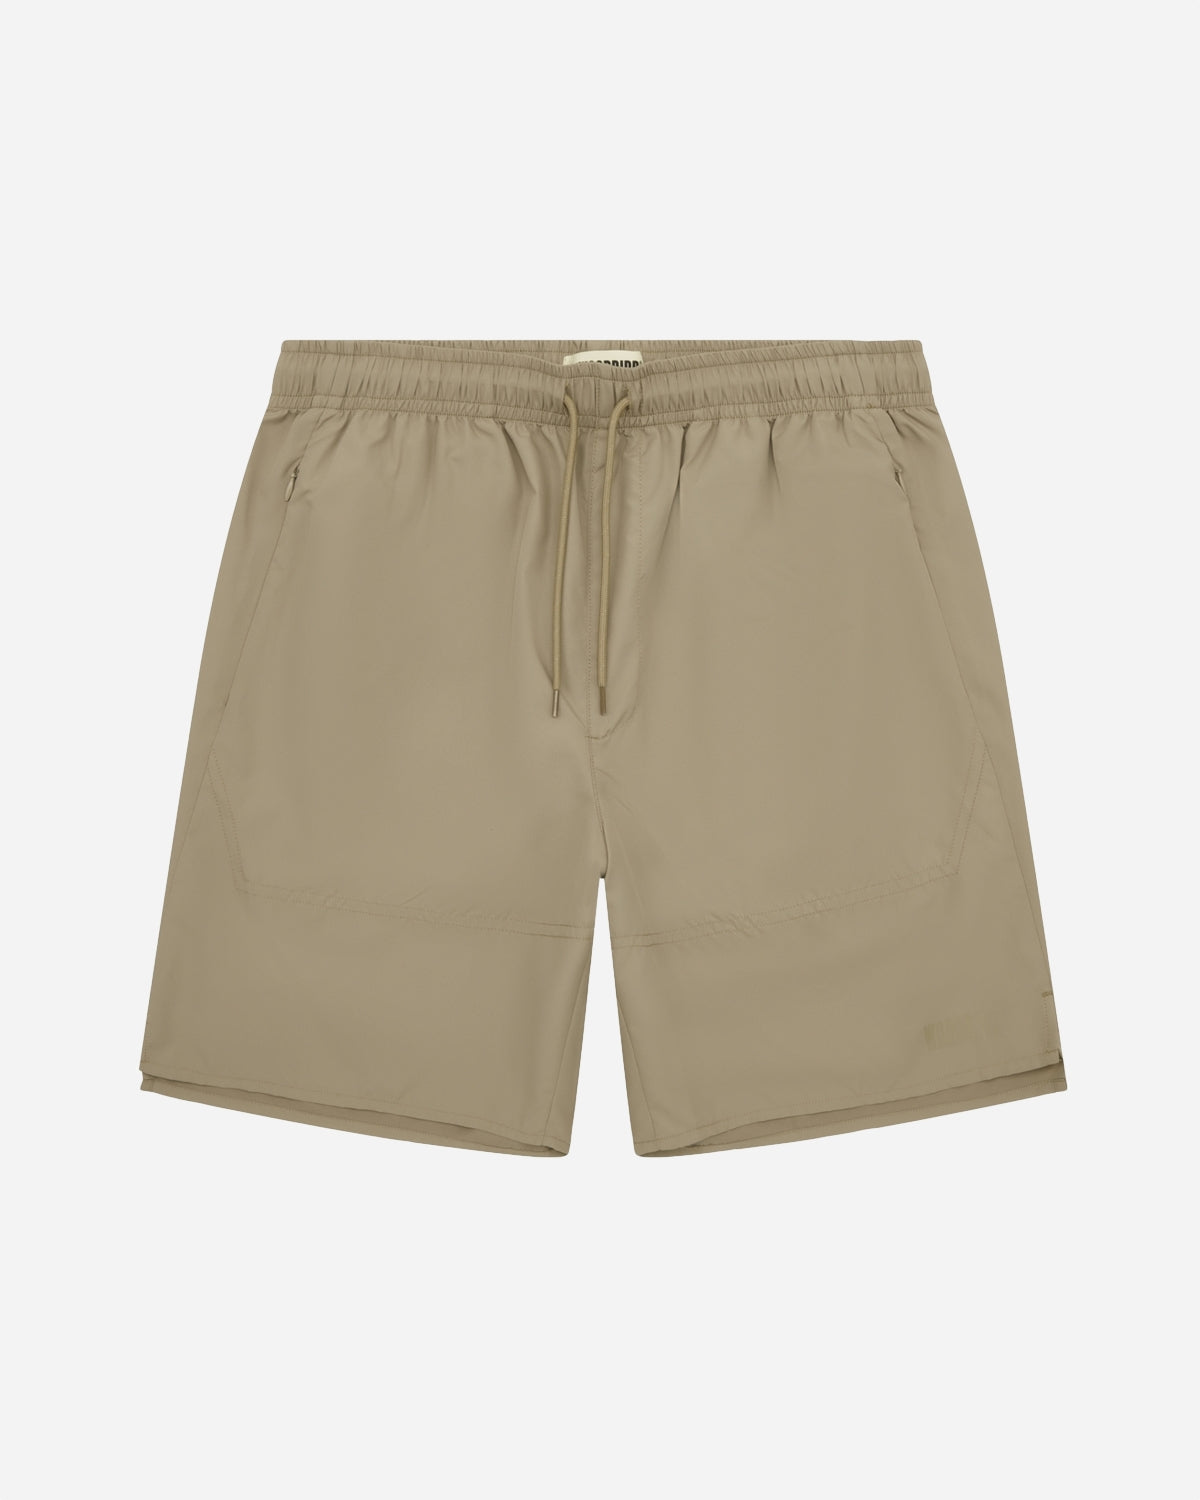 Haiden Tech Shorts - Taupe Brown